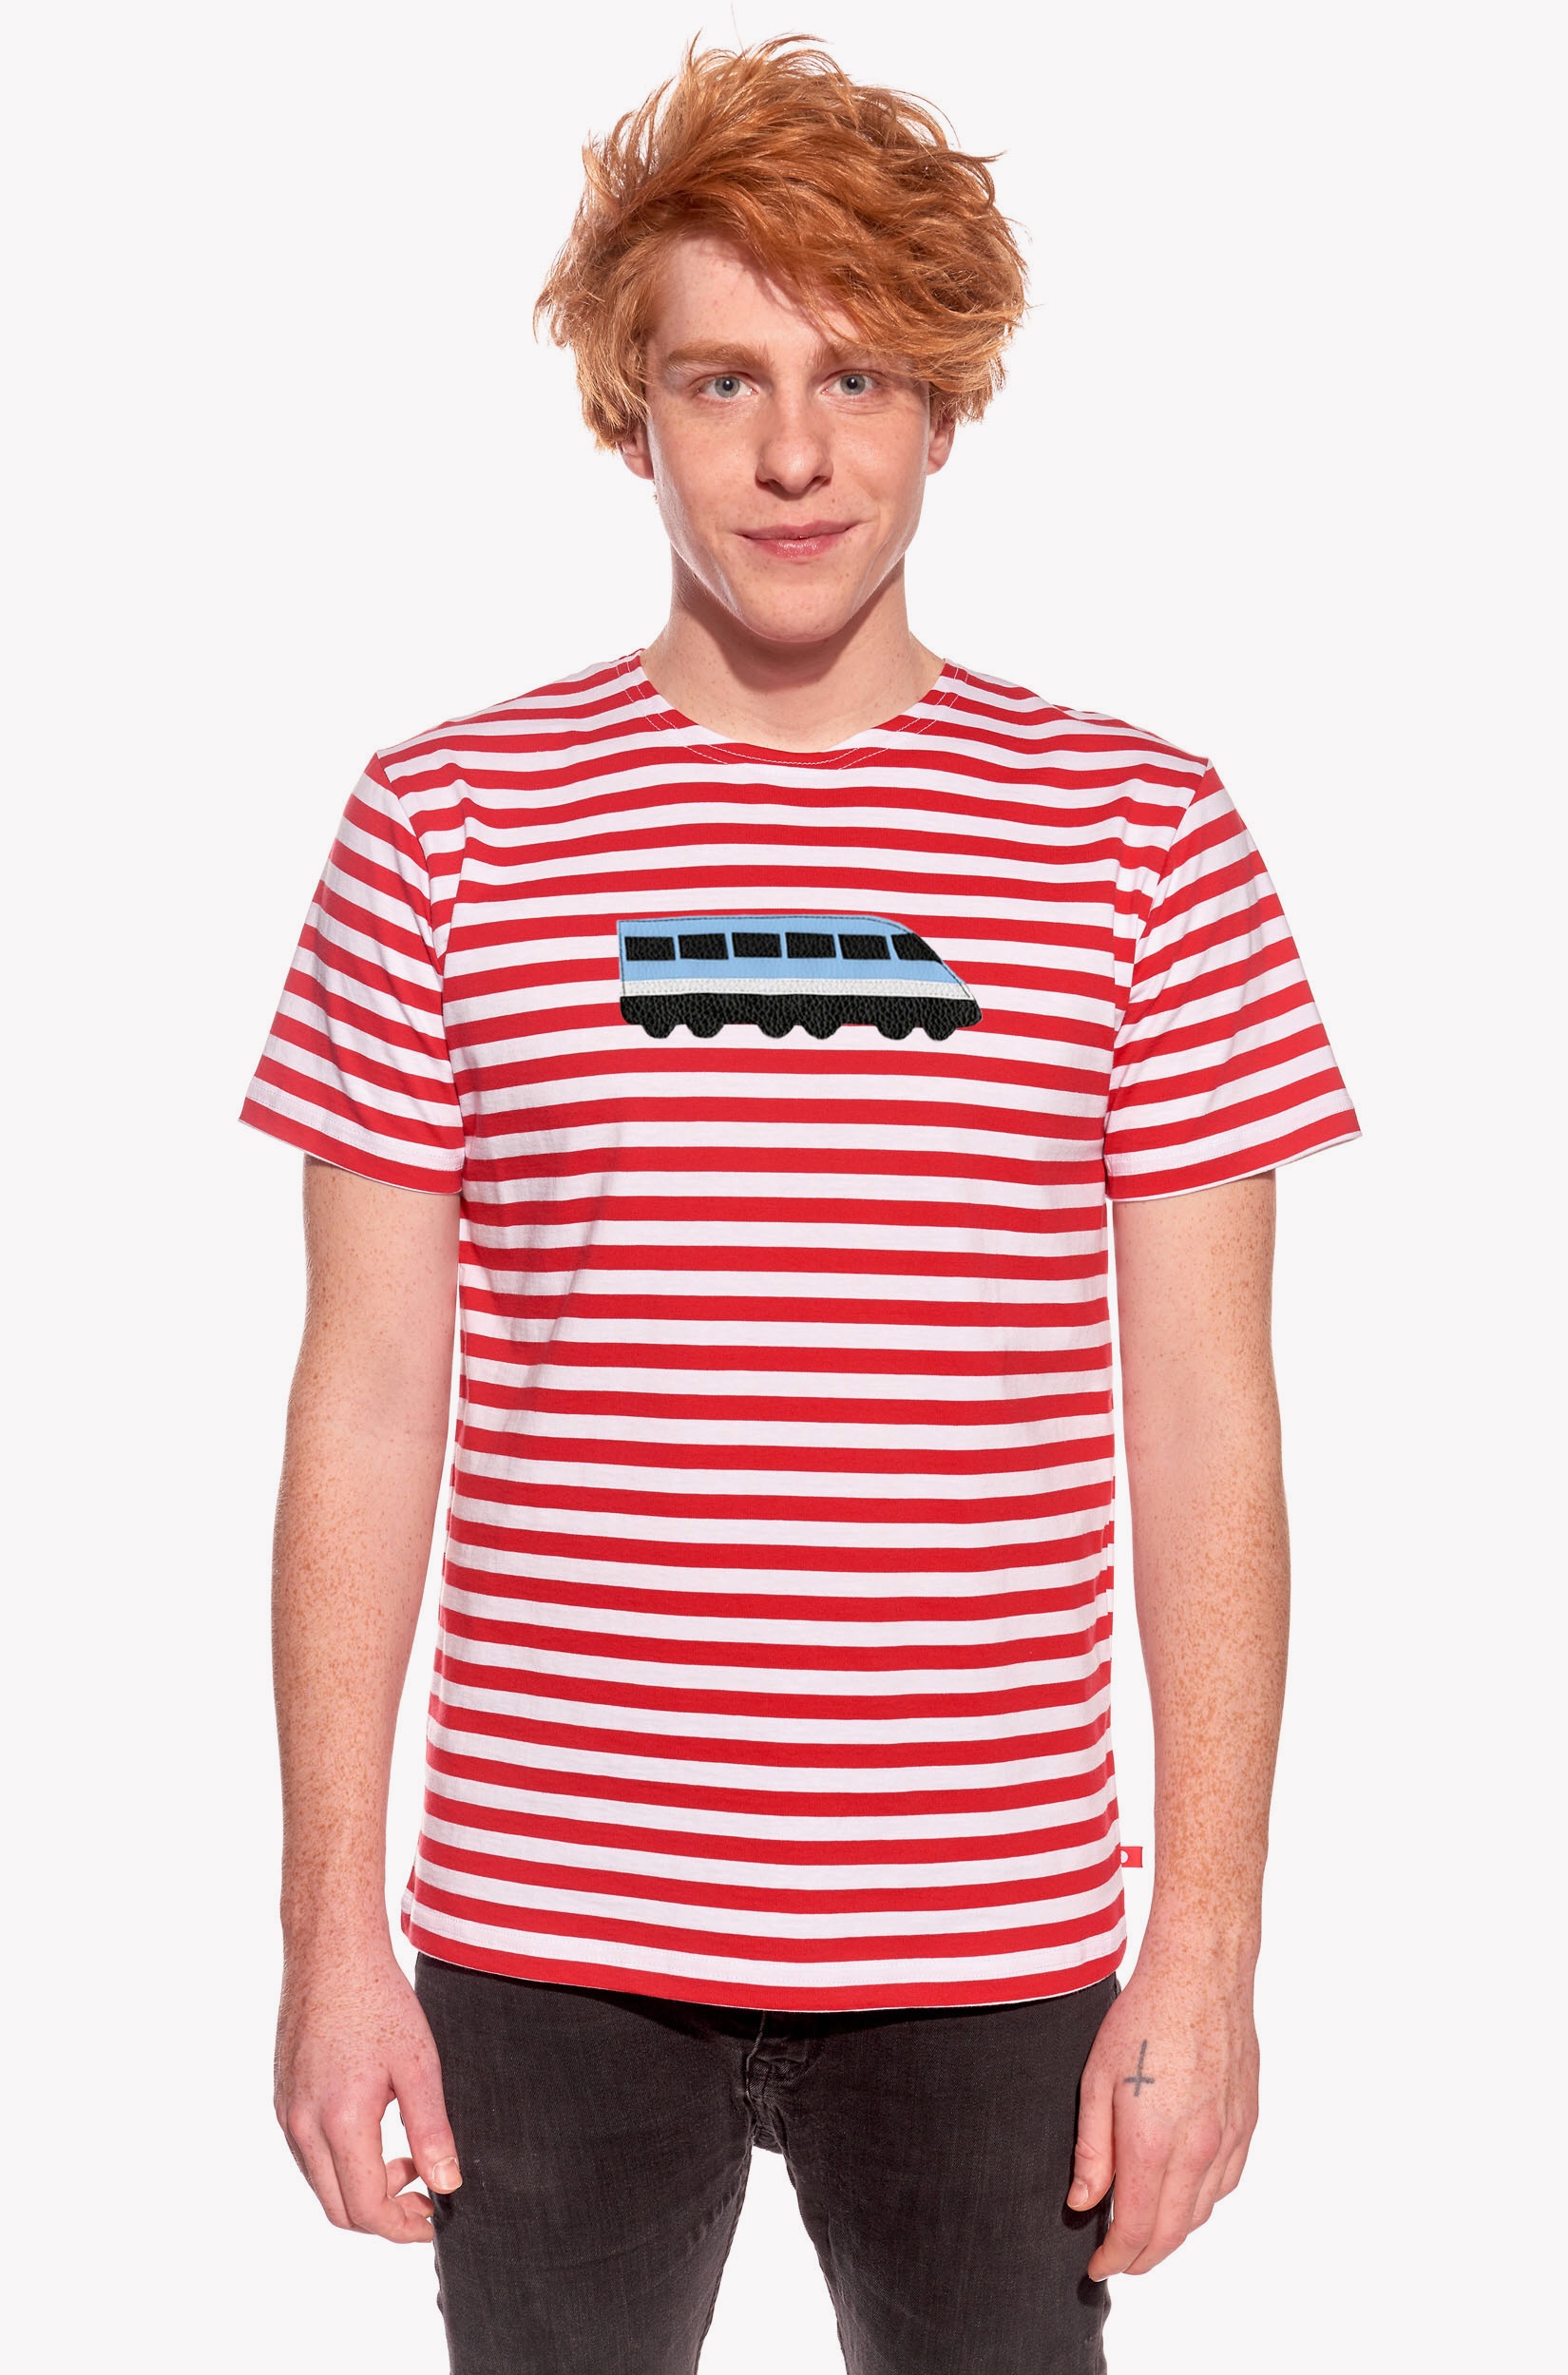 Shirt with train